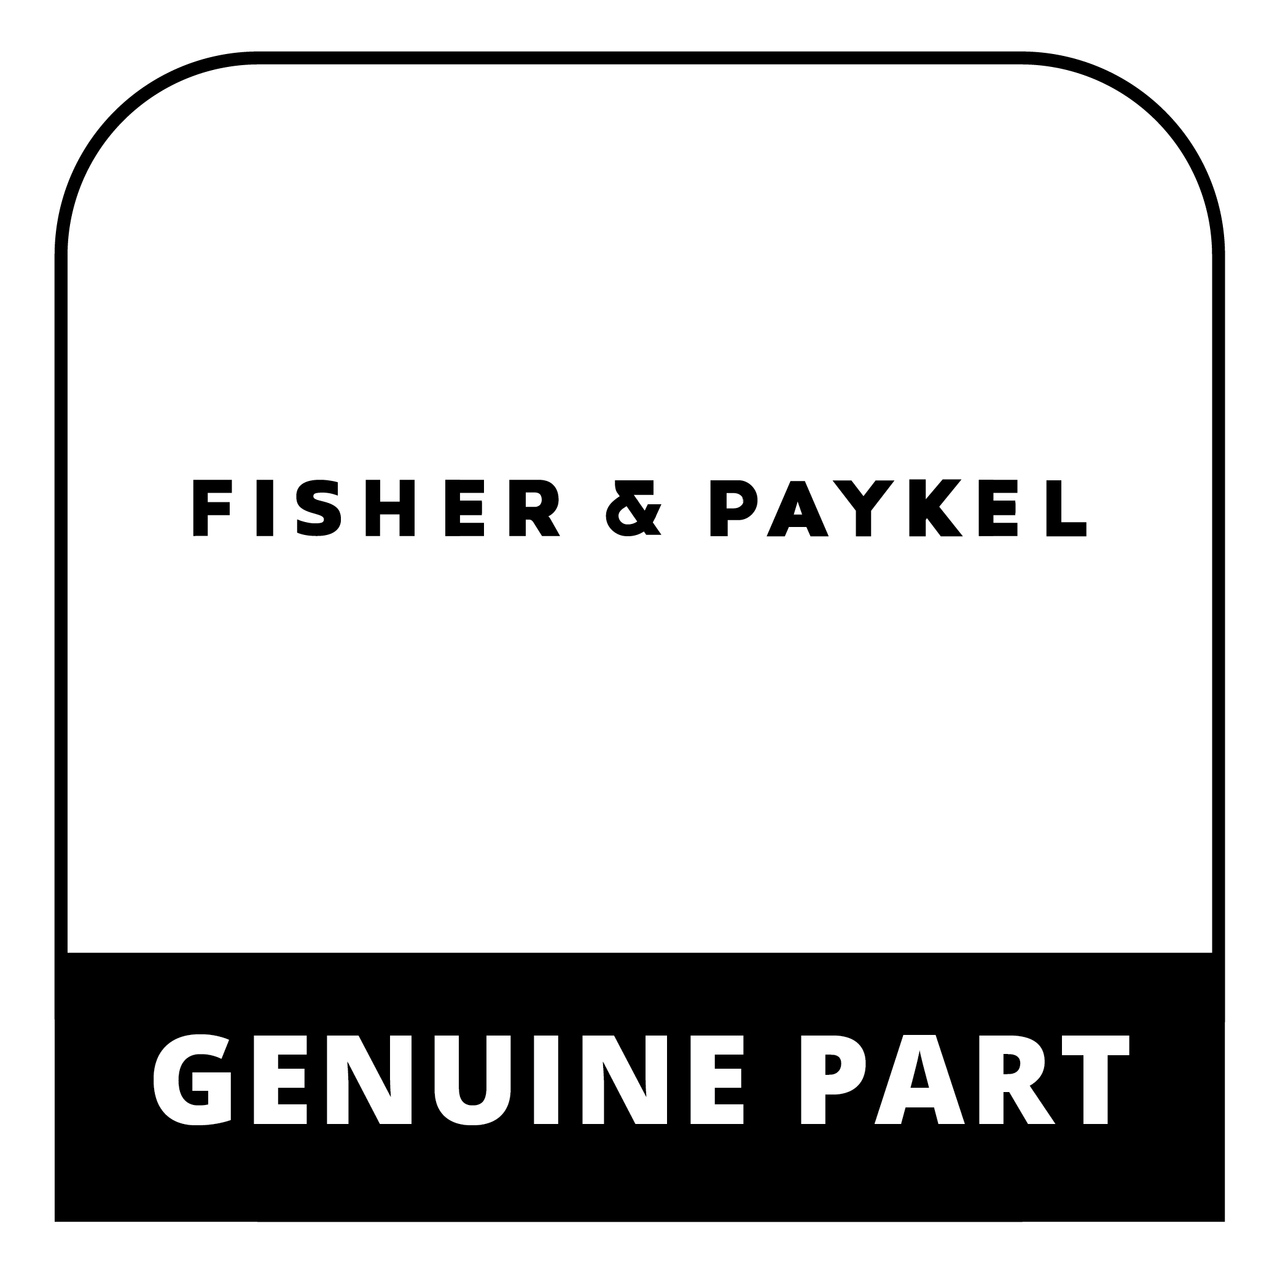 Fisher & Paykel (DCS) 248092 - Box Rh Orifice 17 Gd - Genuine Fisher & Paykel (DCS) Part